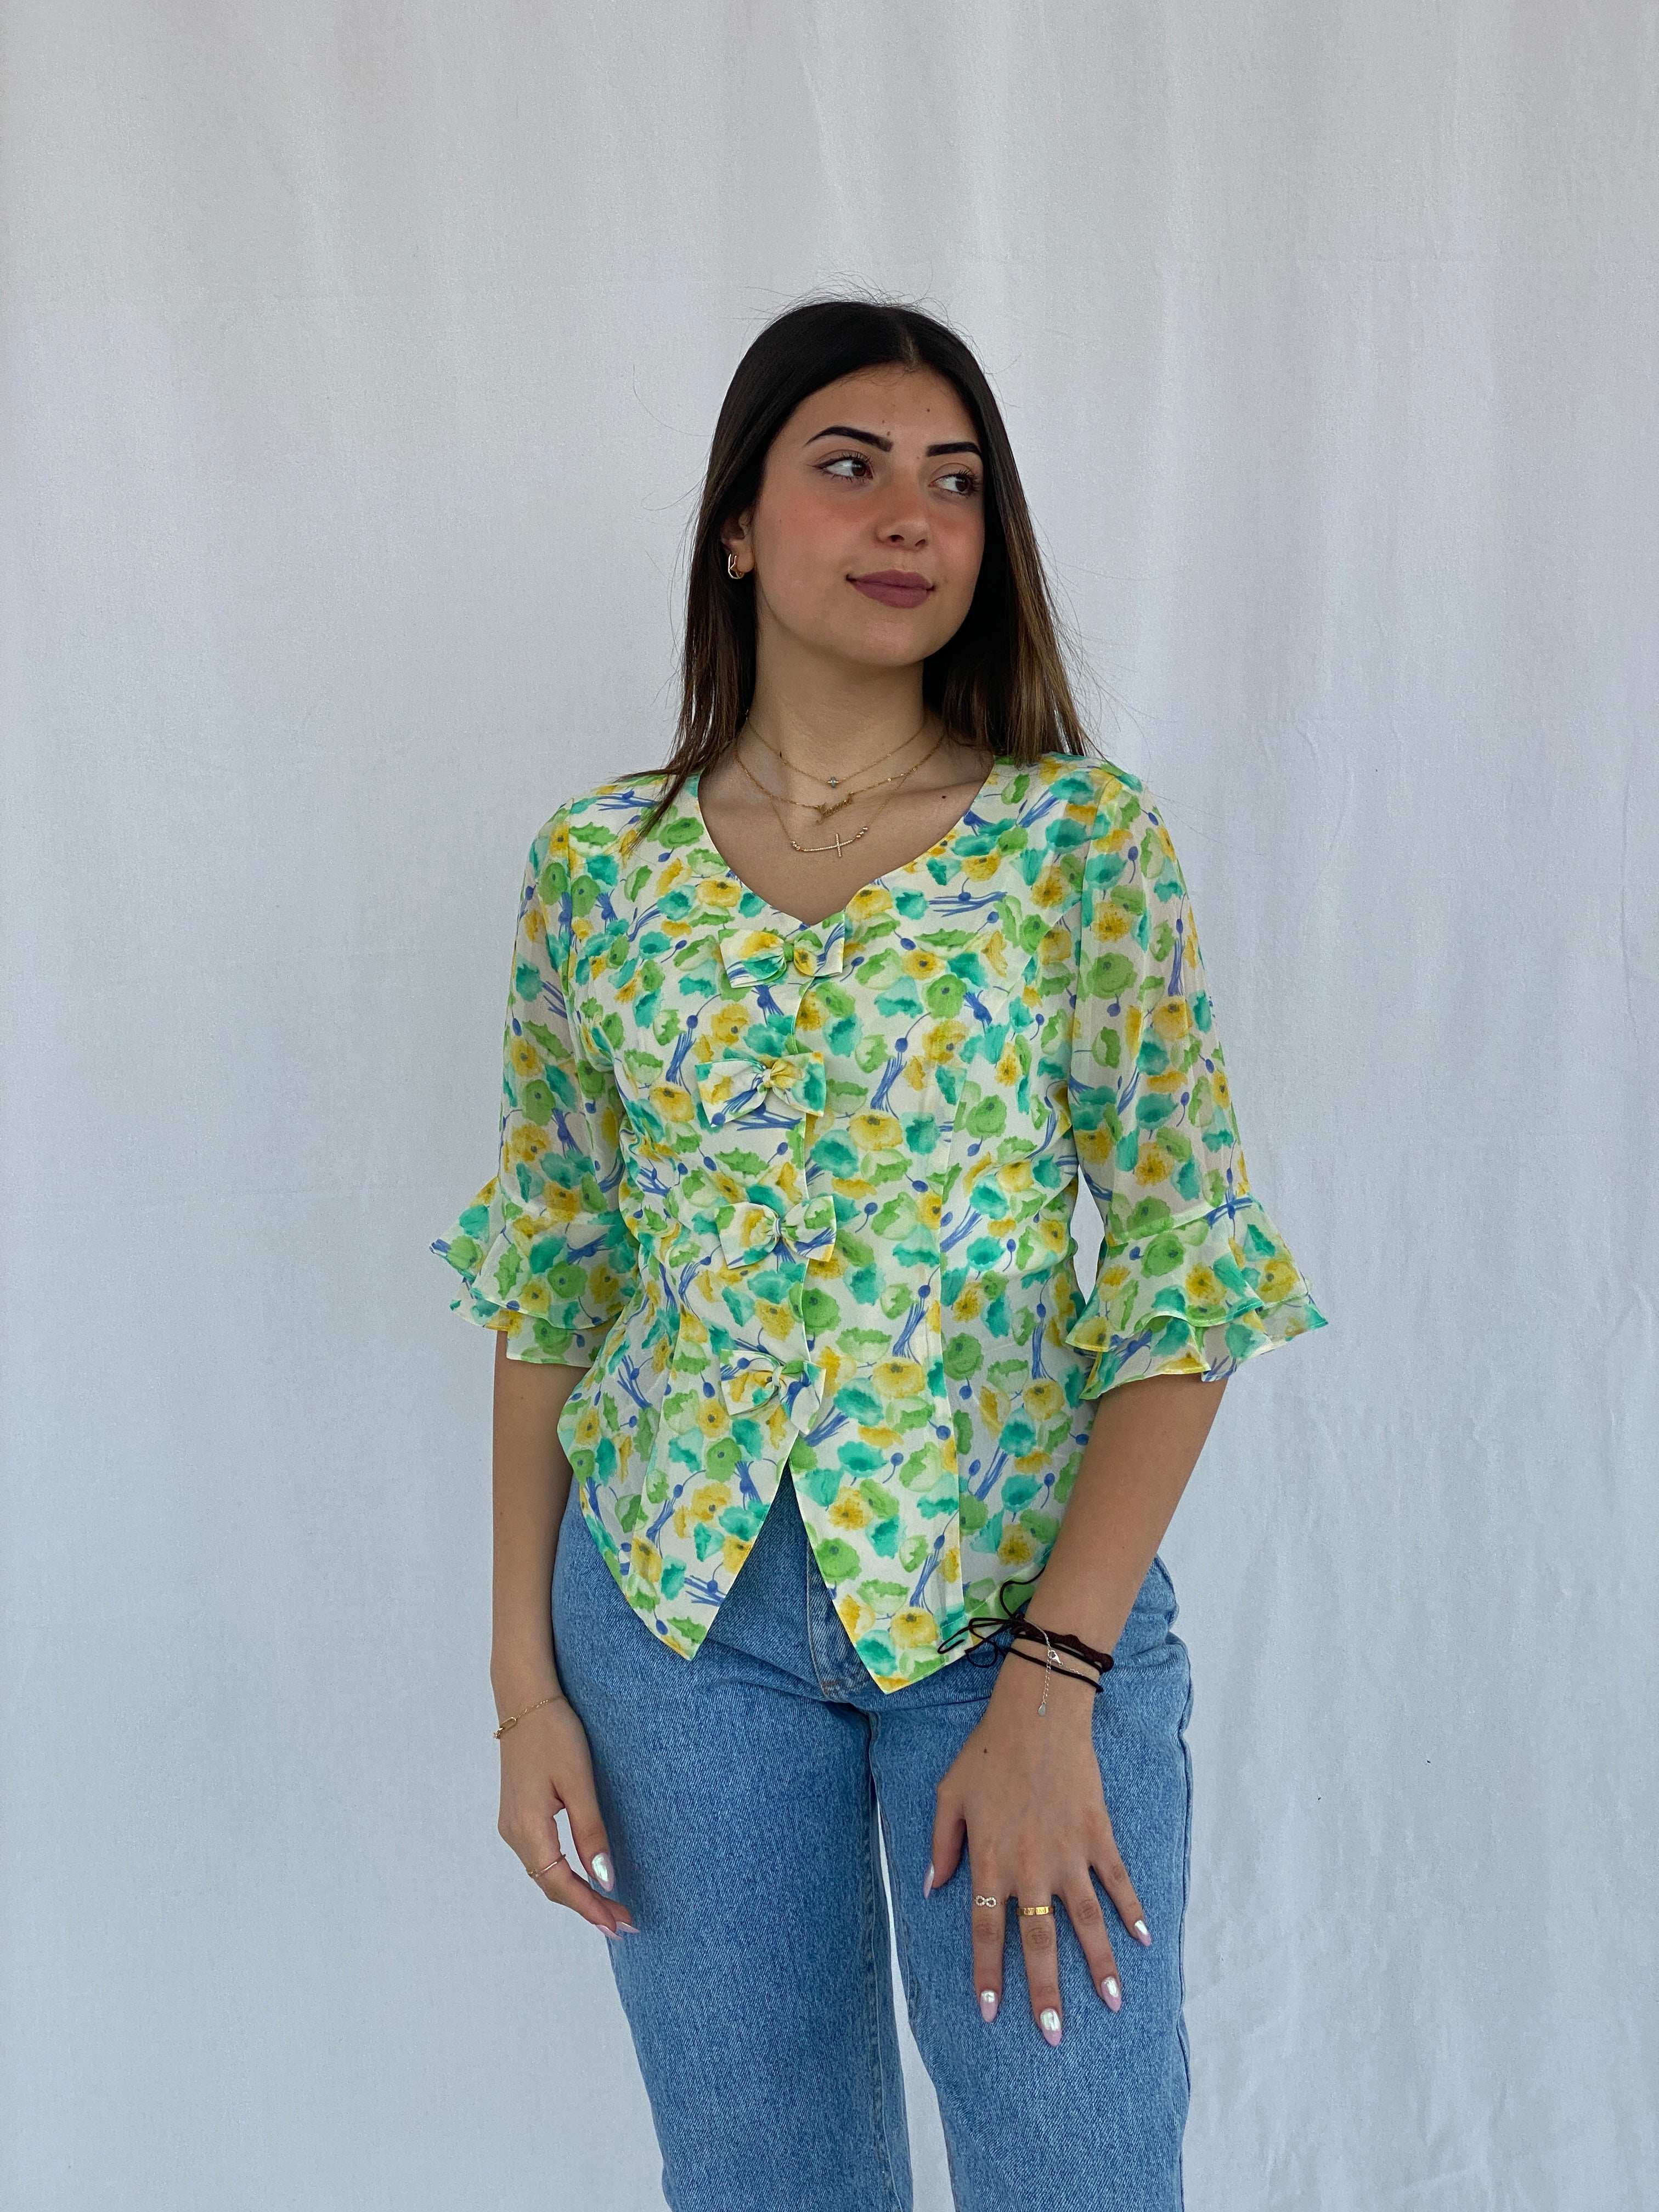 Vintage Floral Green and Yellow Shirt Size S - Balagan Vintage Half Sleeve Shirt floral, floral print, floral shirt, Juana, NEW IN